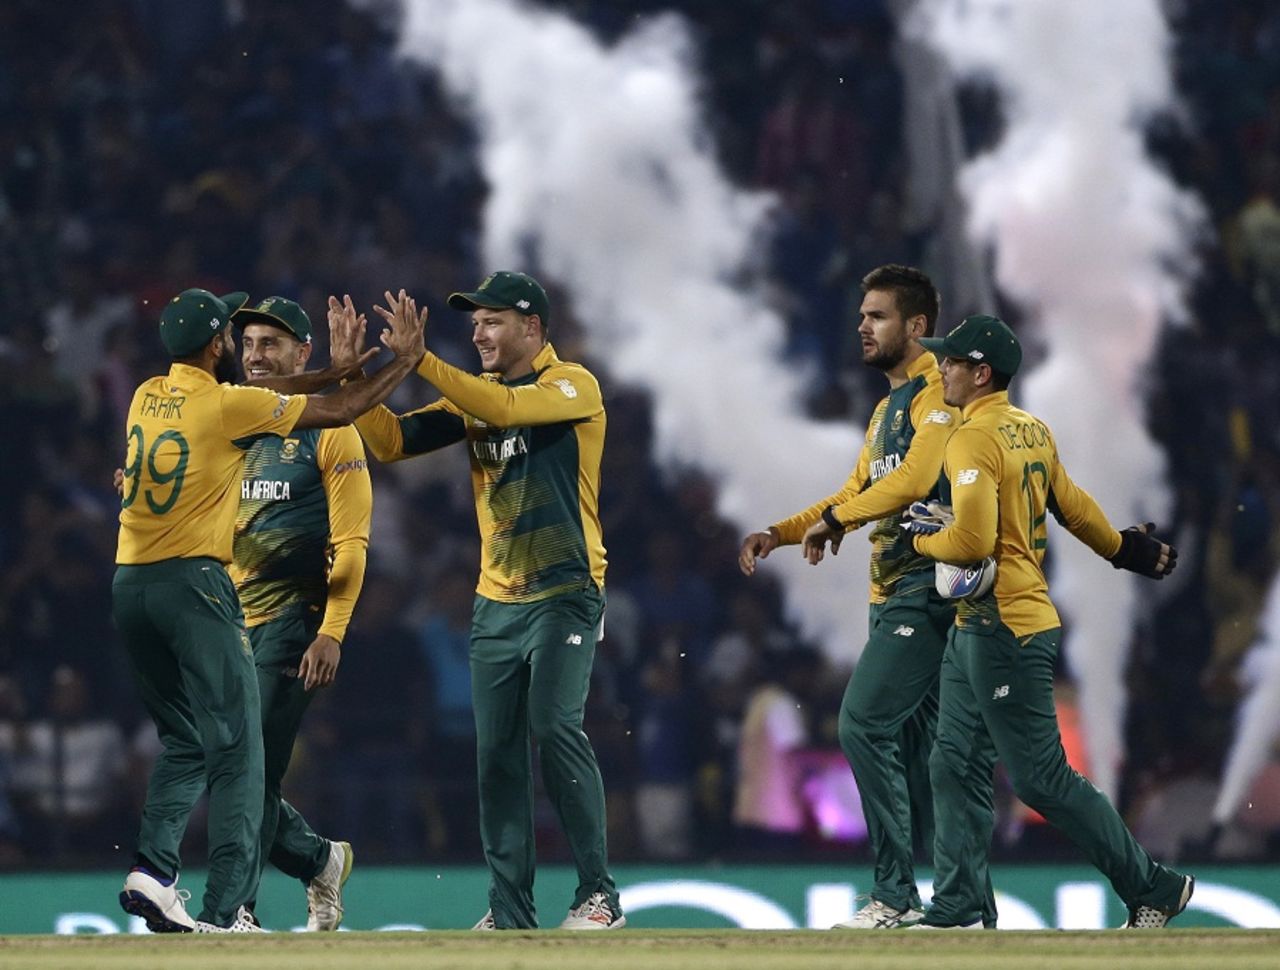 South Africa celebrate the fall of a wicket, South Africa v West Indies, World T20 2016, Group 1, Nagpur, March 25, 2016